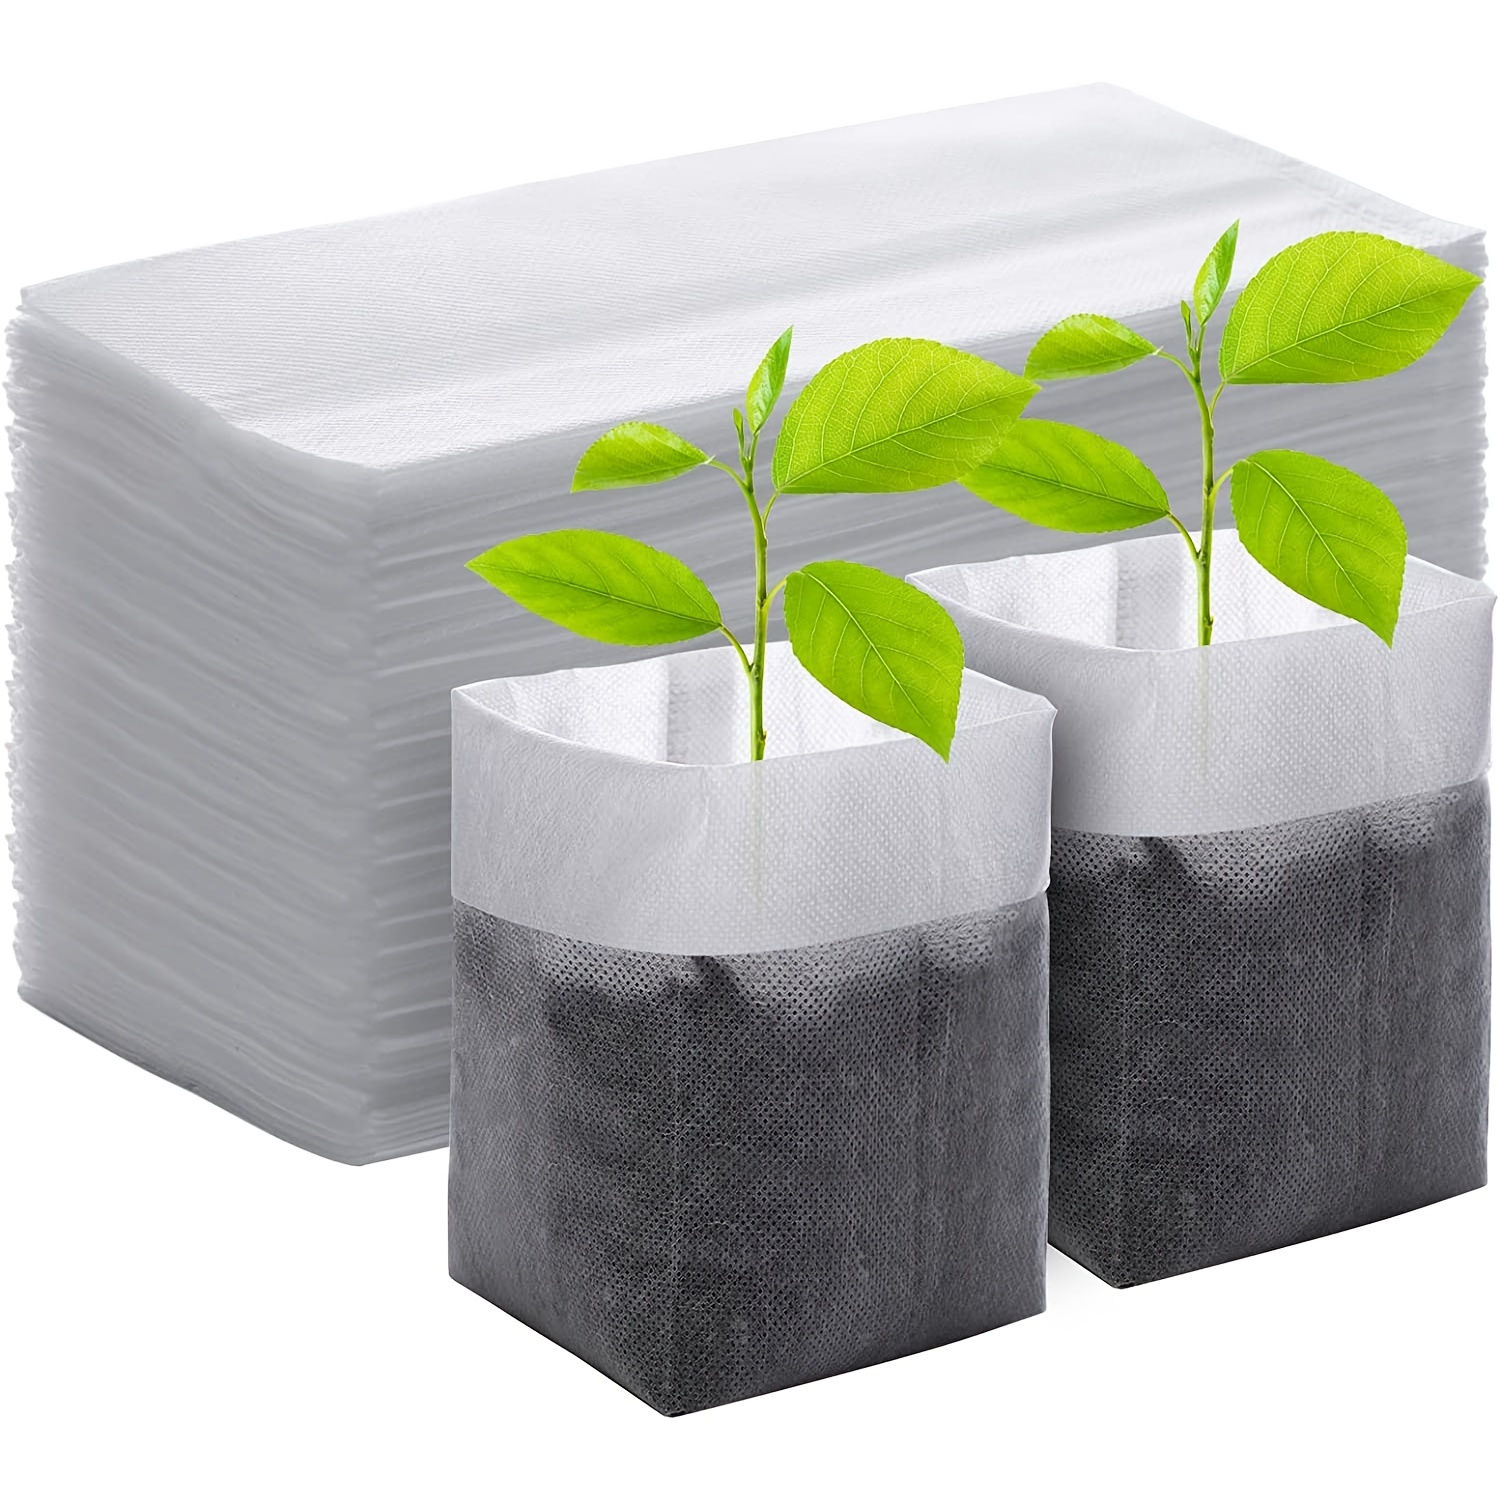 100pcs Nursery Growing Bags for Planting Seedling Cutting Clones